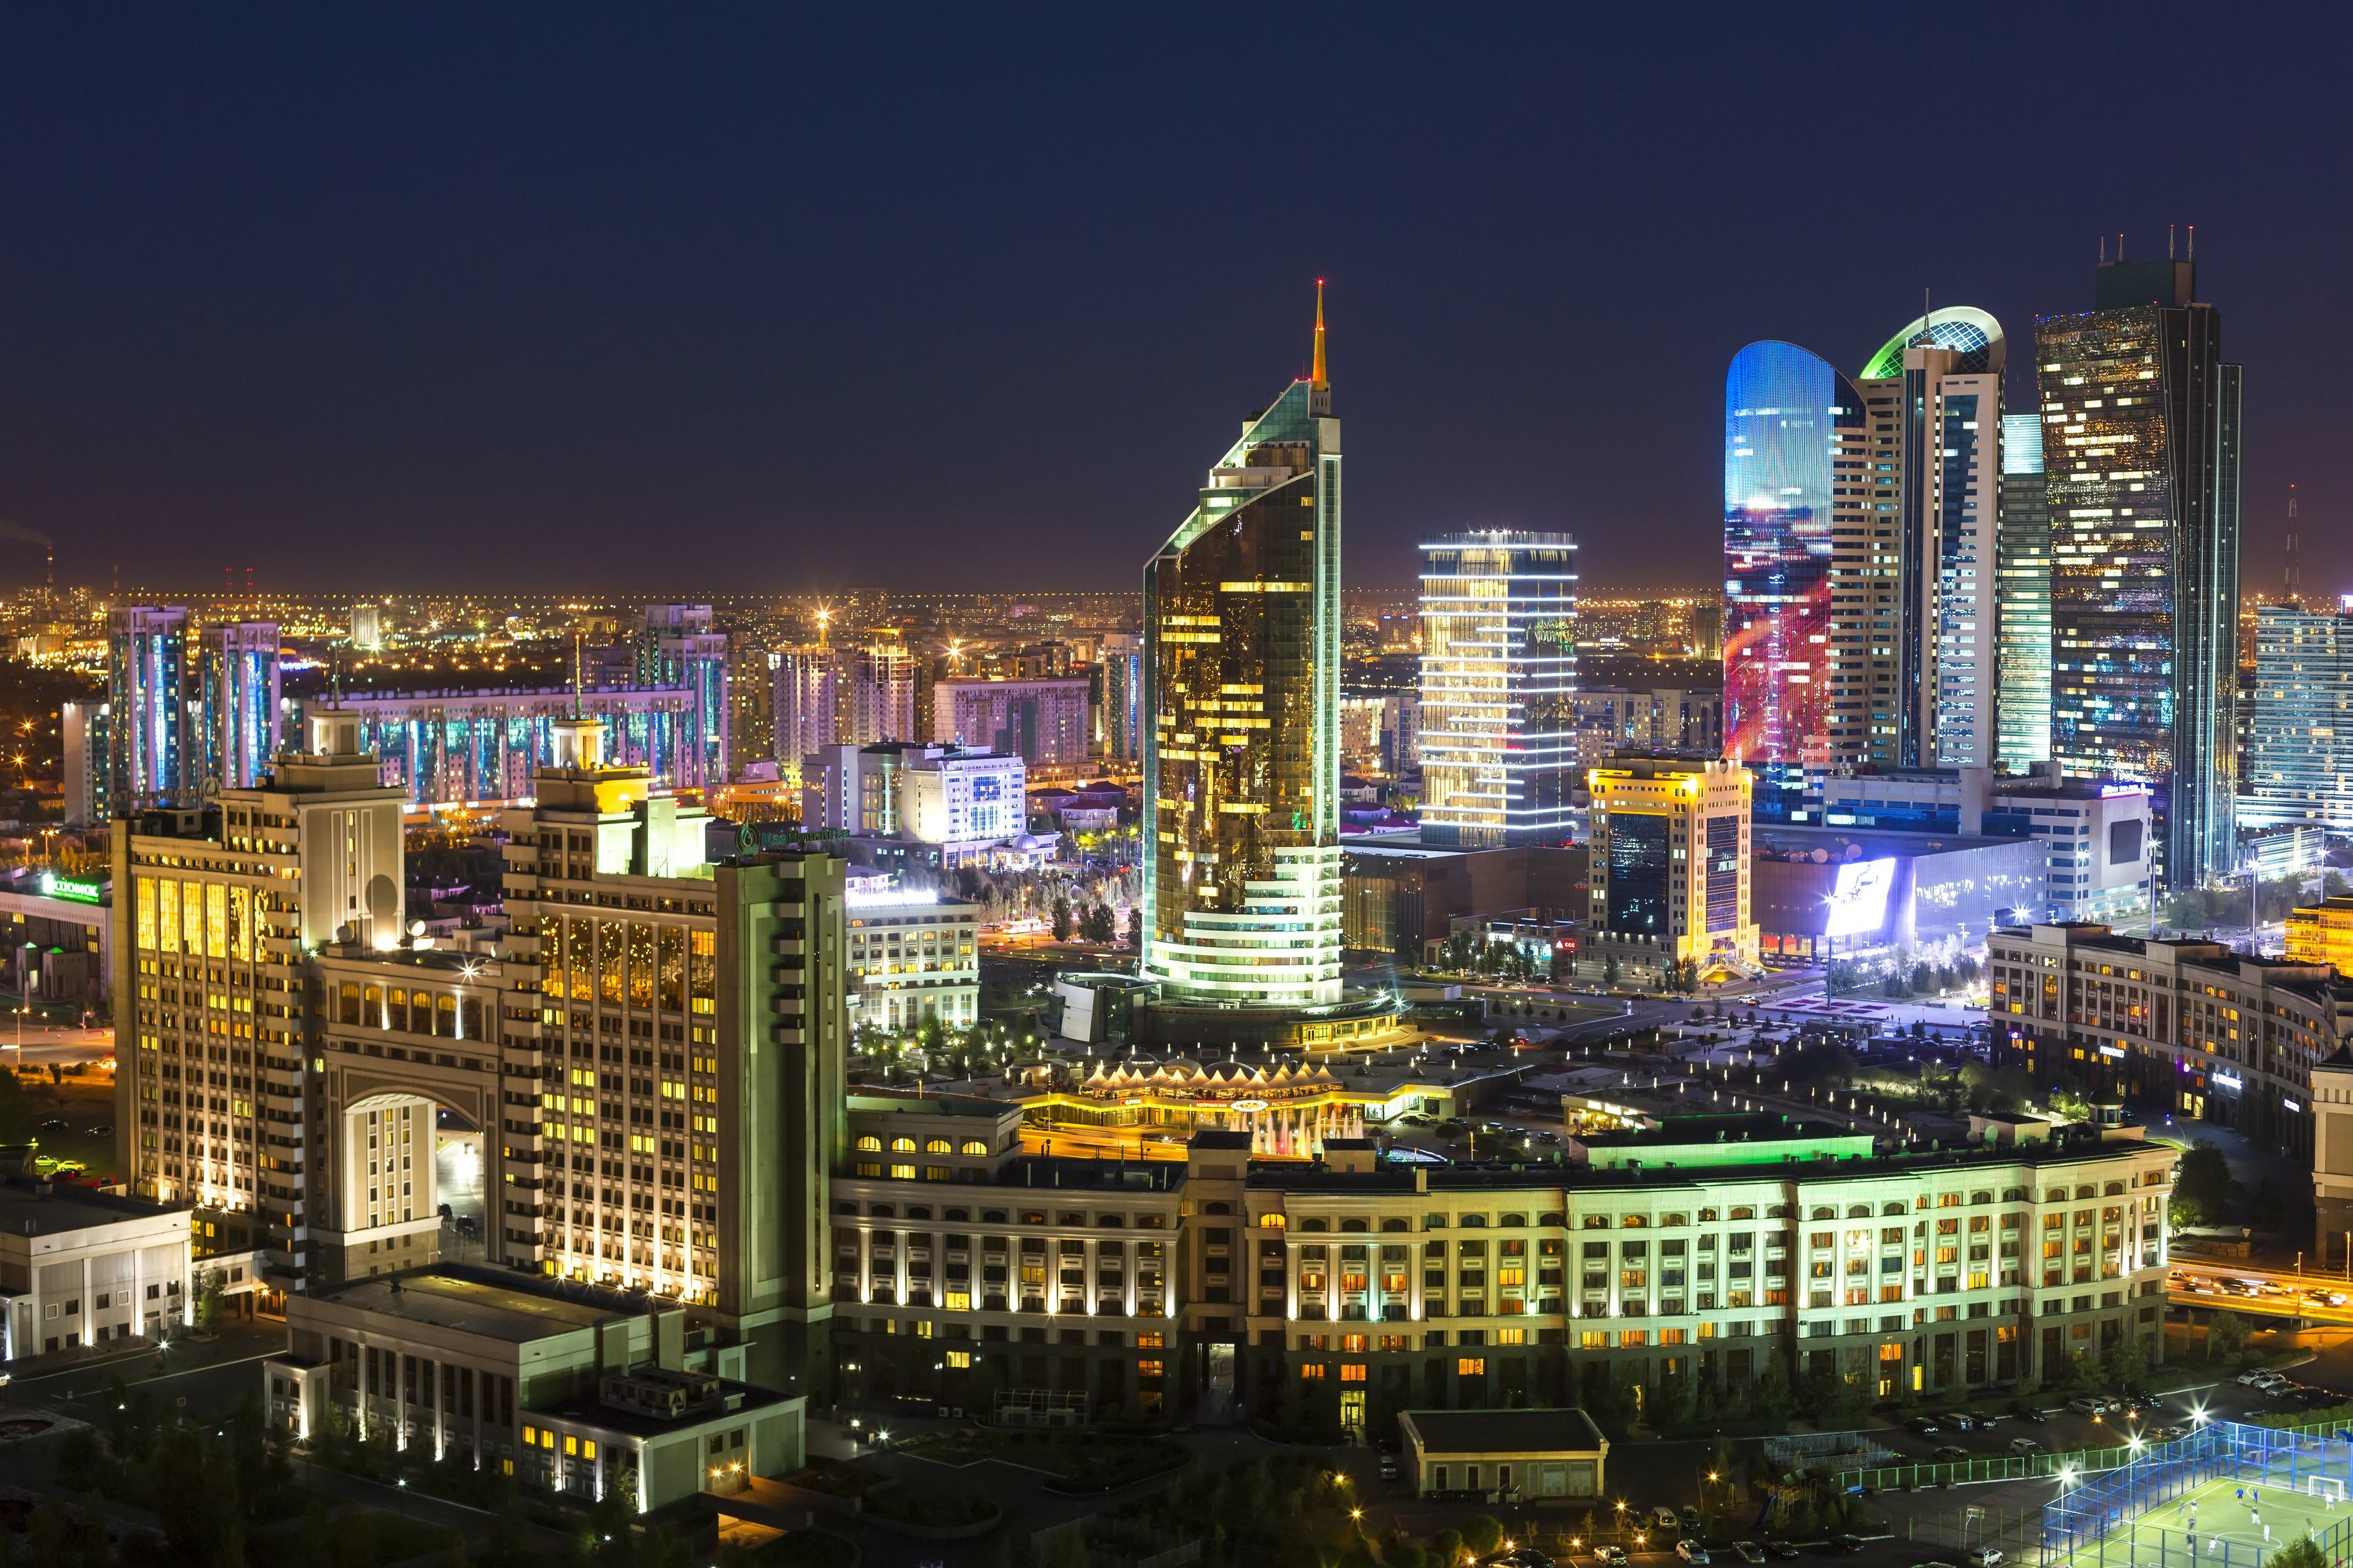 The night view of the city center and central business district of Astana, Kazakhstan. /CFP